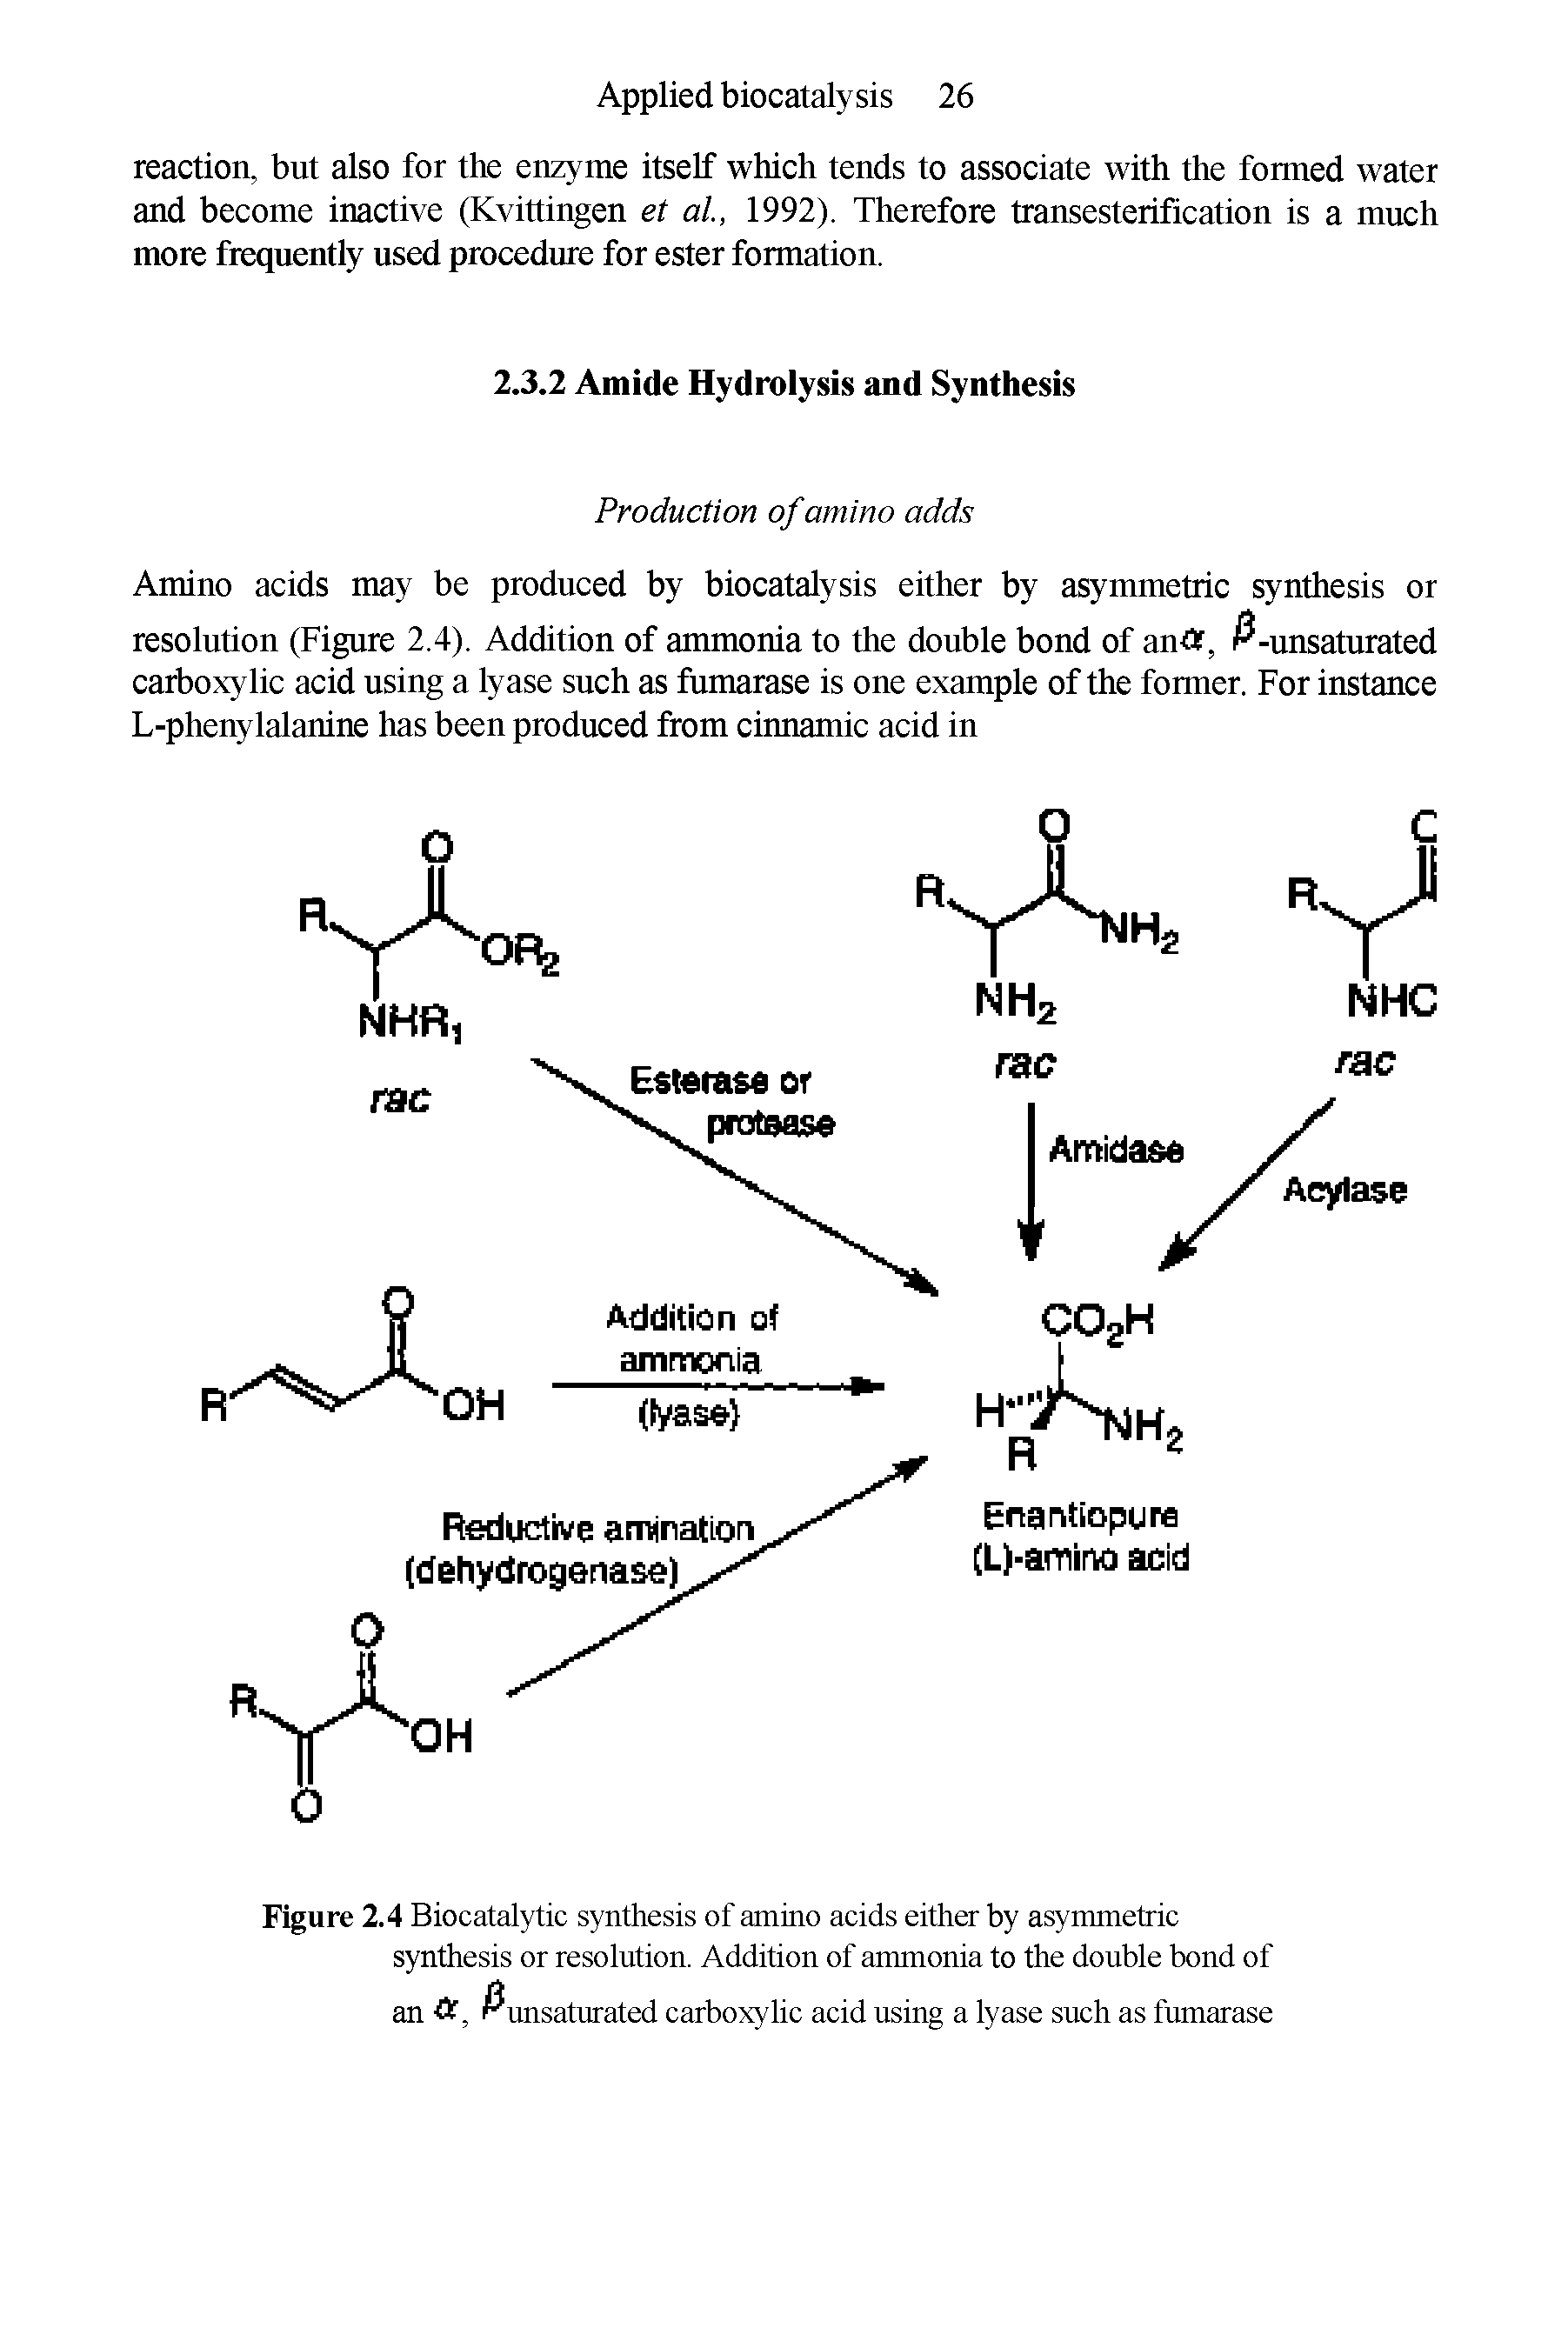 Figure 2.4 Biocatalytic synthesis of amino acids either by asymmetric...